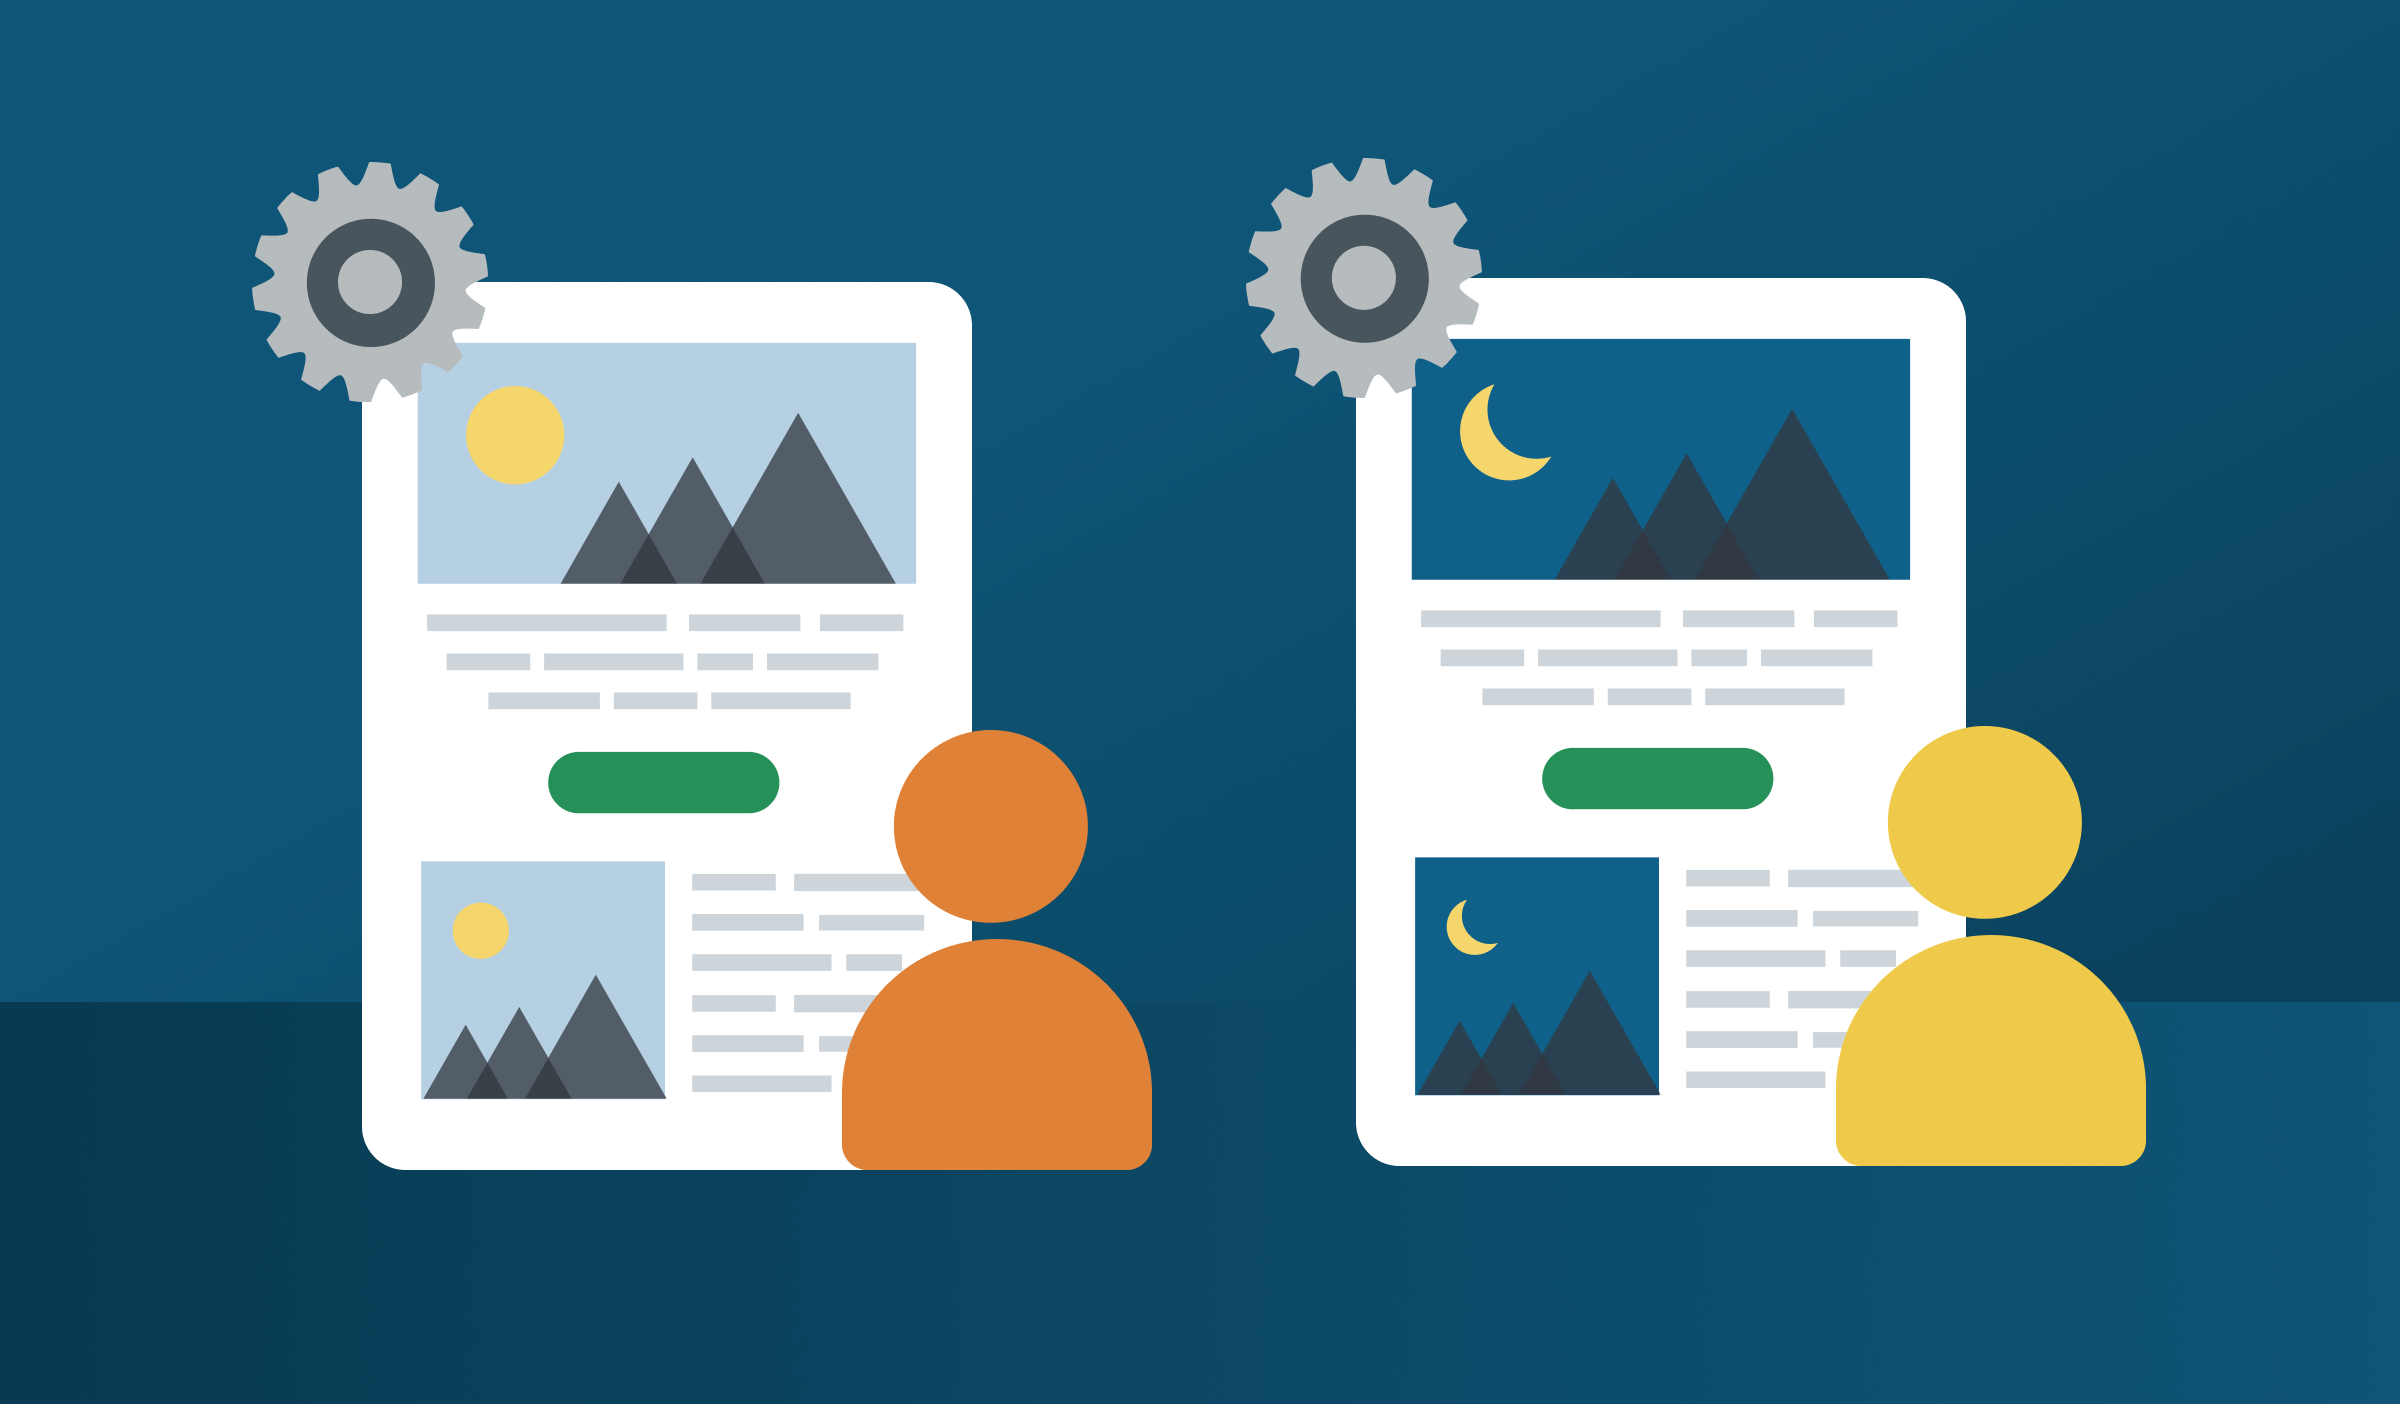 Two personalized emails that are dynamically personalized based on when someone's viewing during the day or at night. The first email has a sun in the hero image and the second email has a crescent moon.